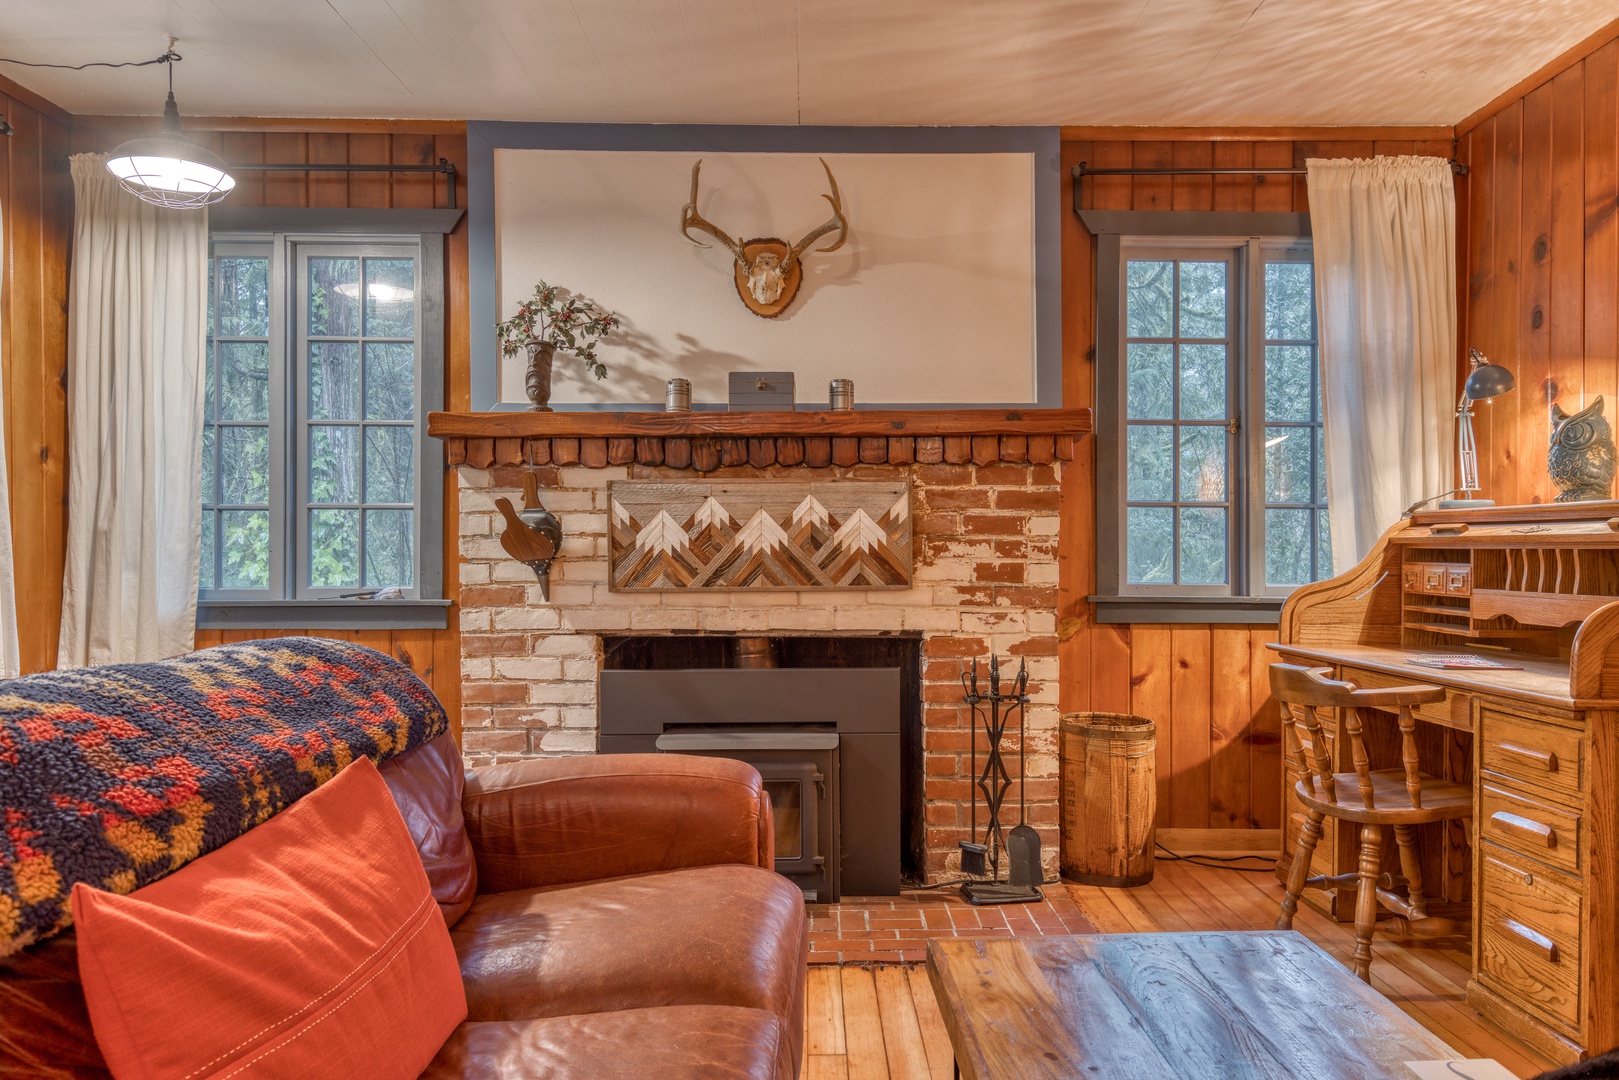 Brightwood Vacation Rentals, Springbrook Cabin - Plenty of books, puzzles, and board games are also available, as well as a record player with an extensive record collection to explore, making this room a very atmospheric place to gather with friends and family for fun and entertainment.